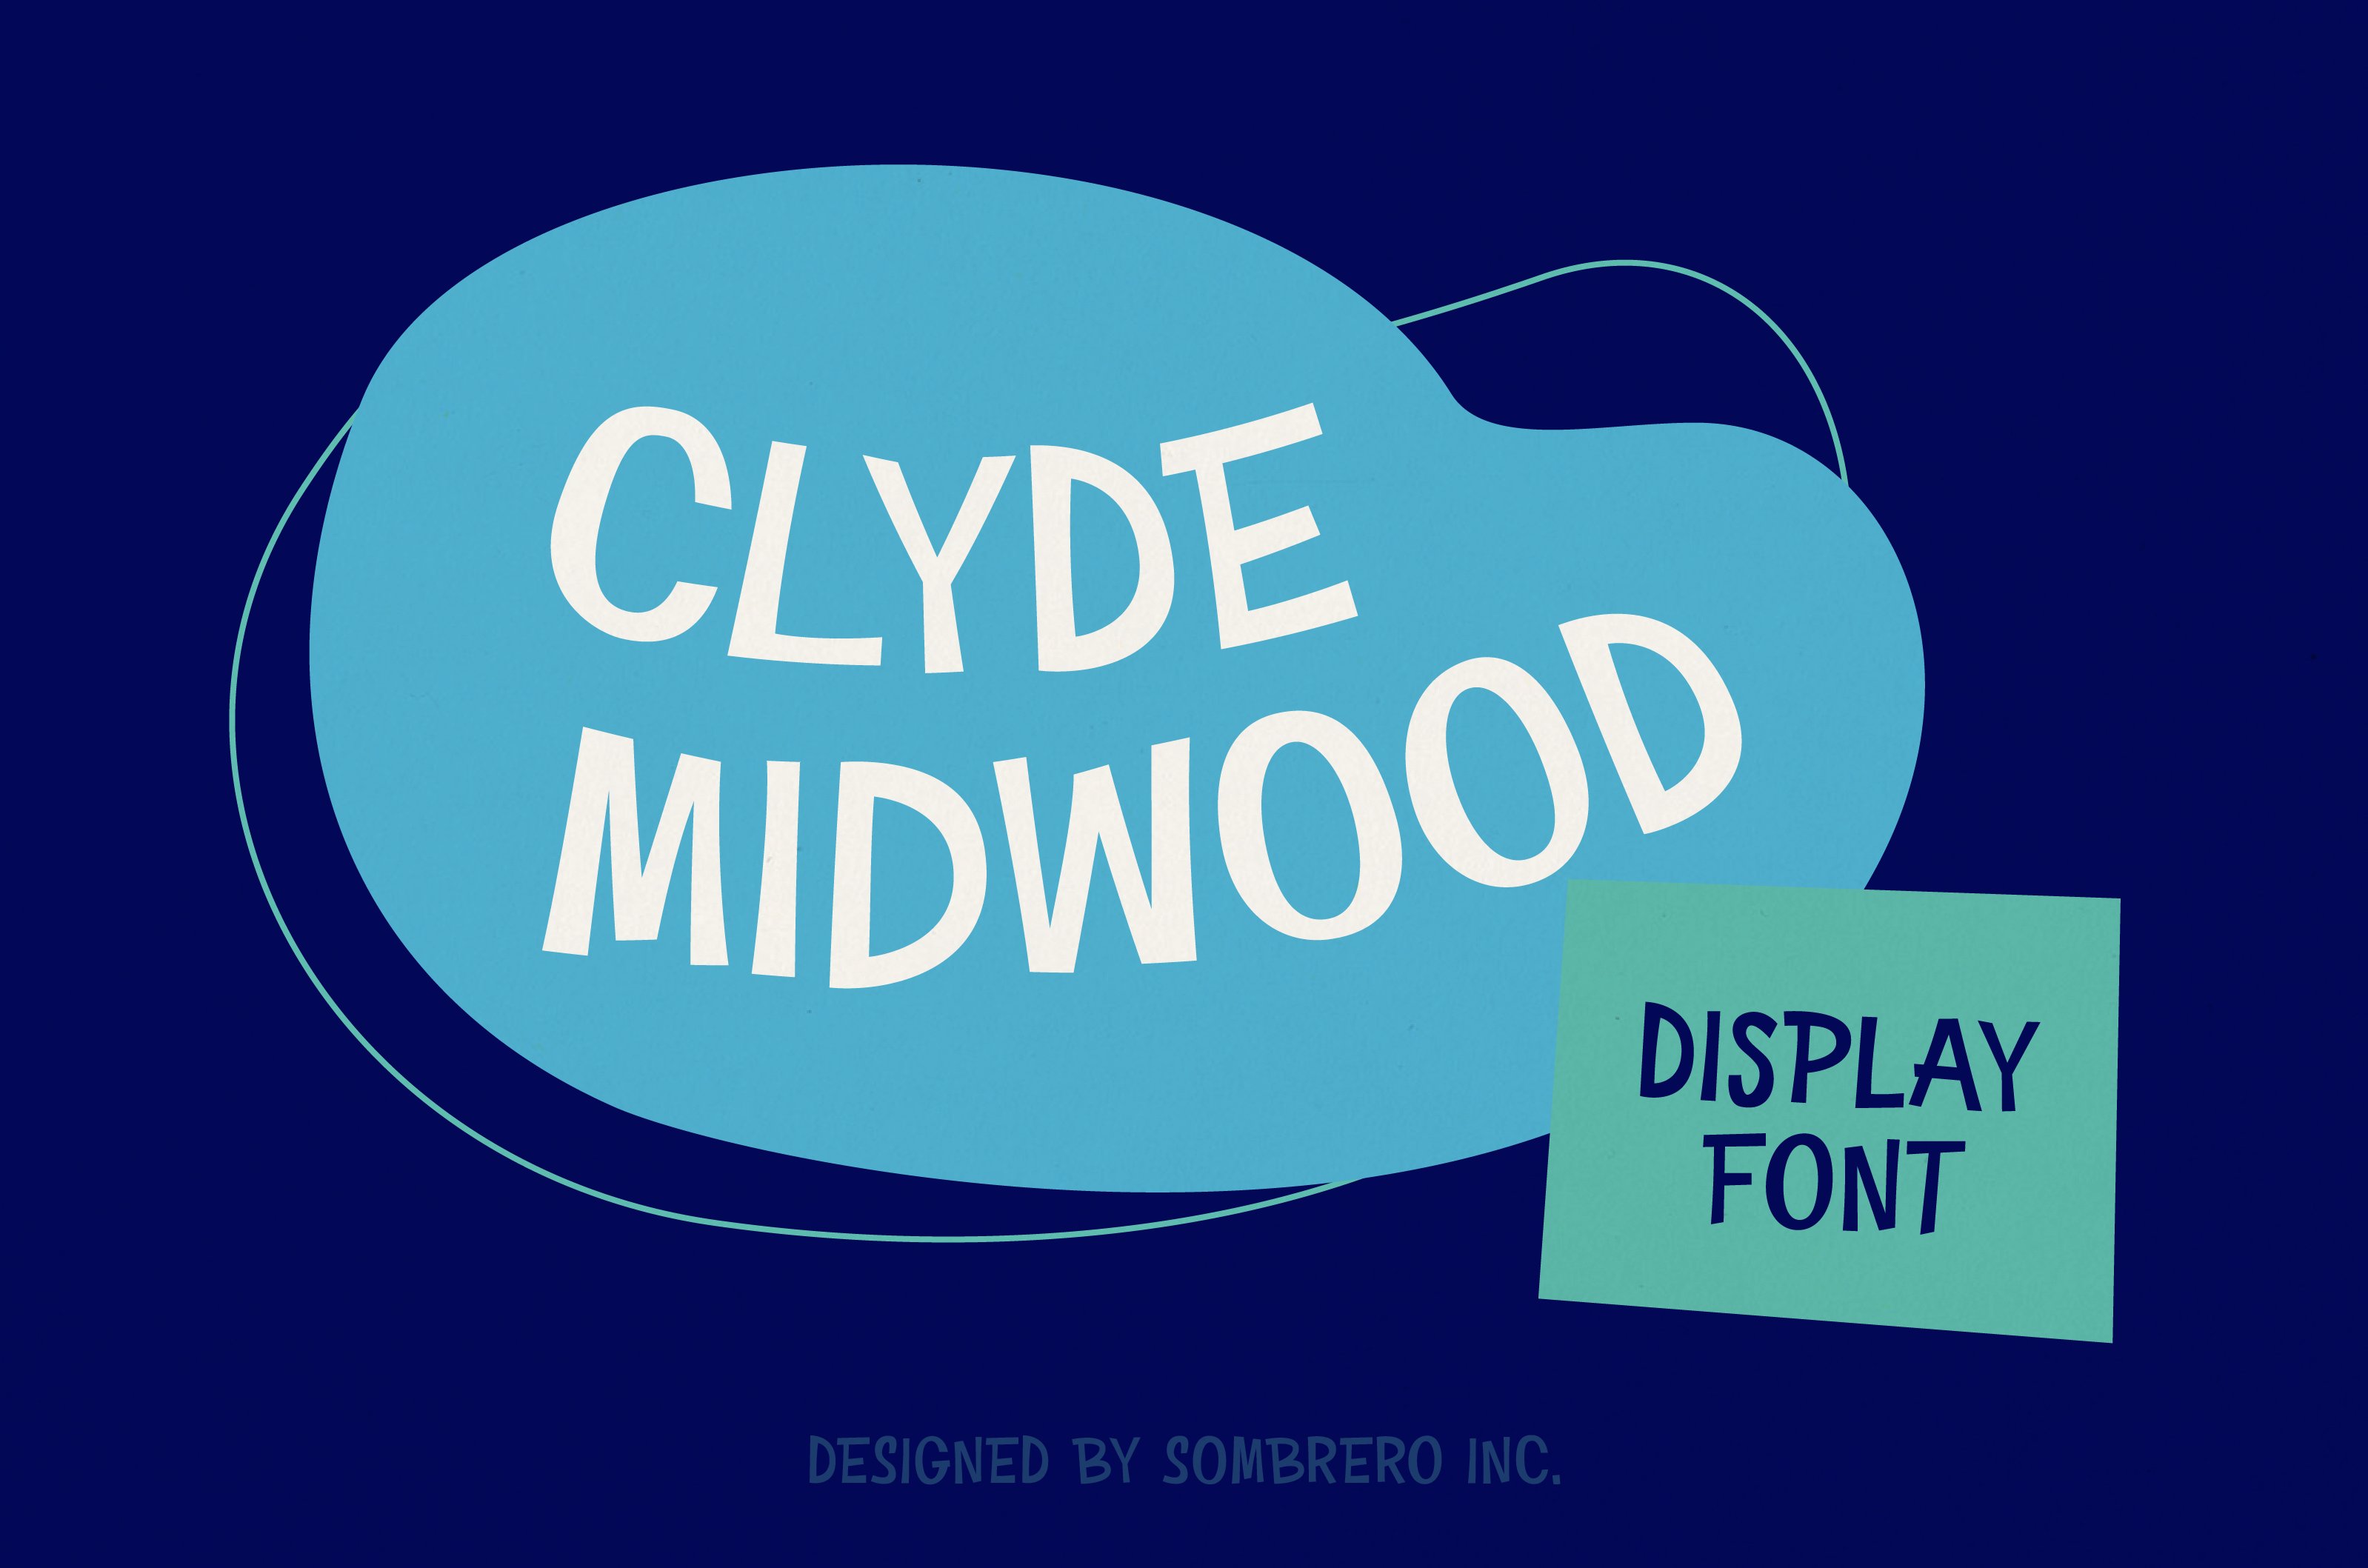 Clyde Midwood - Offbeat Display Font cover image.